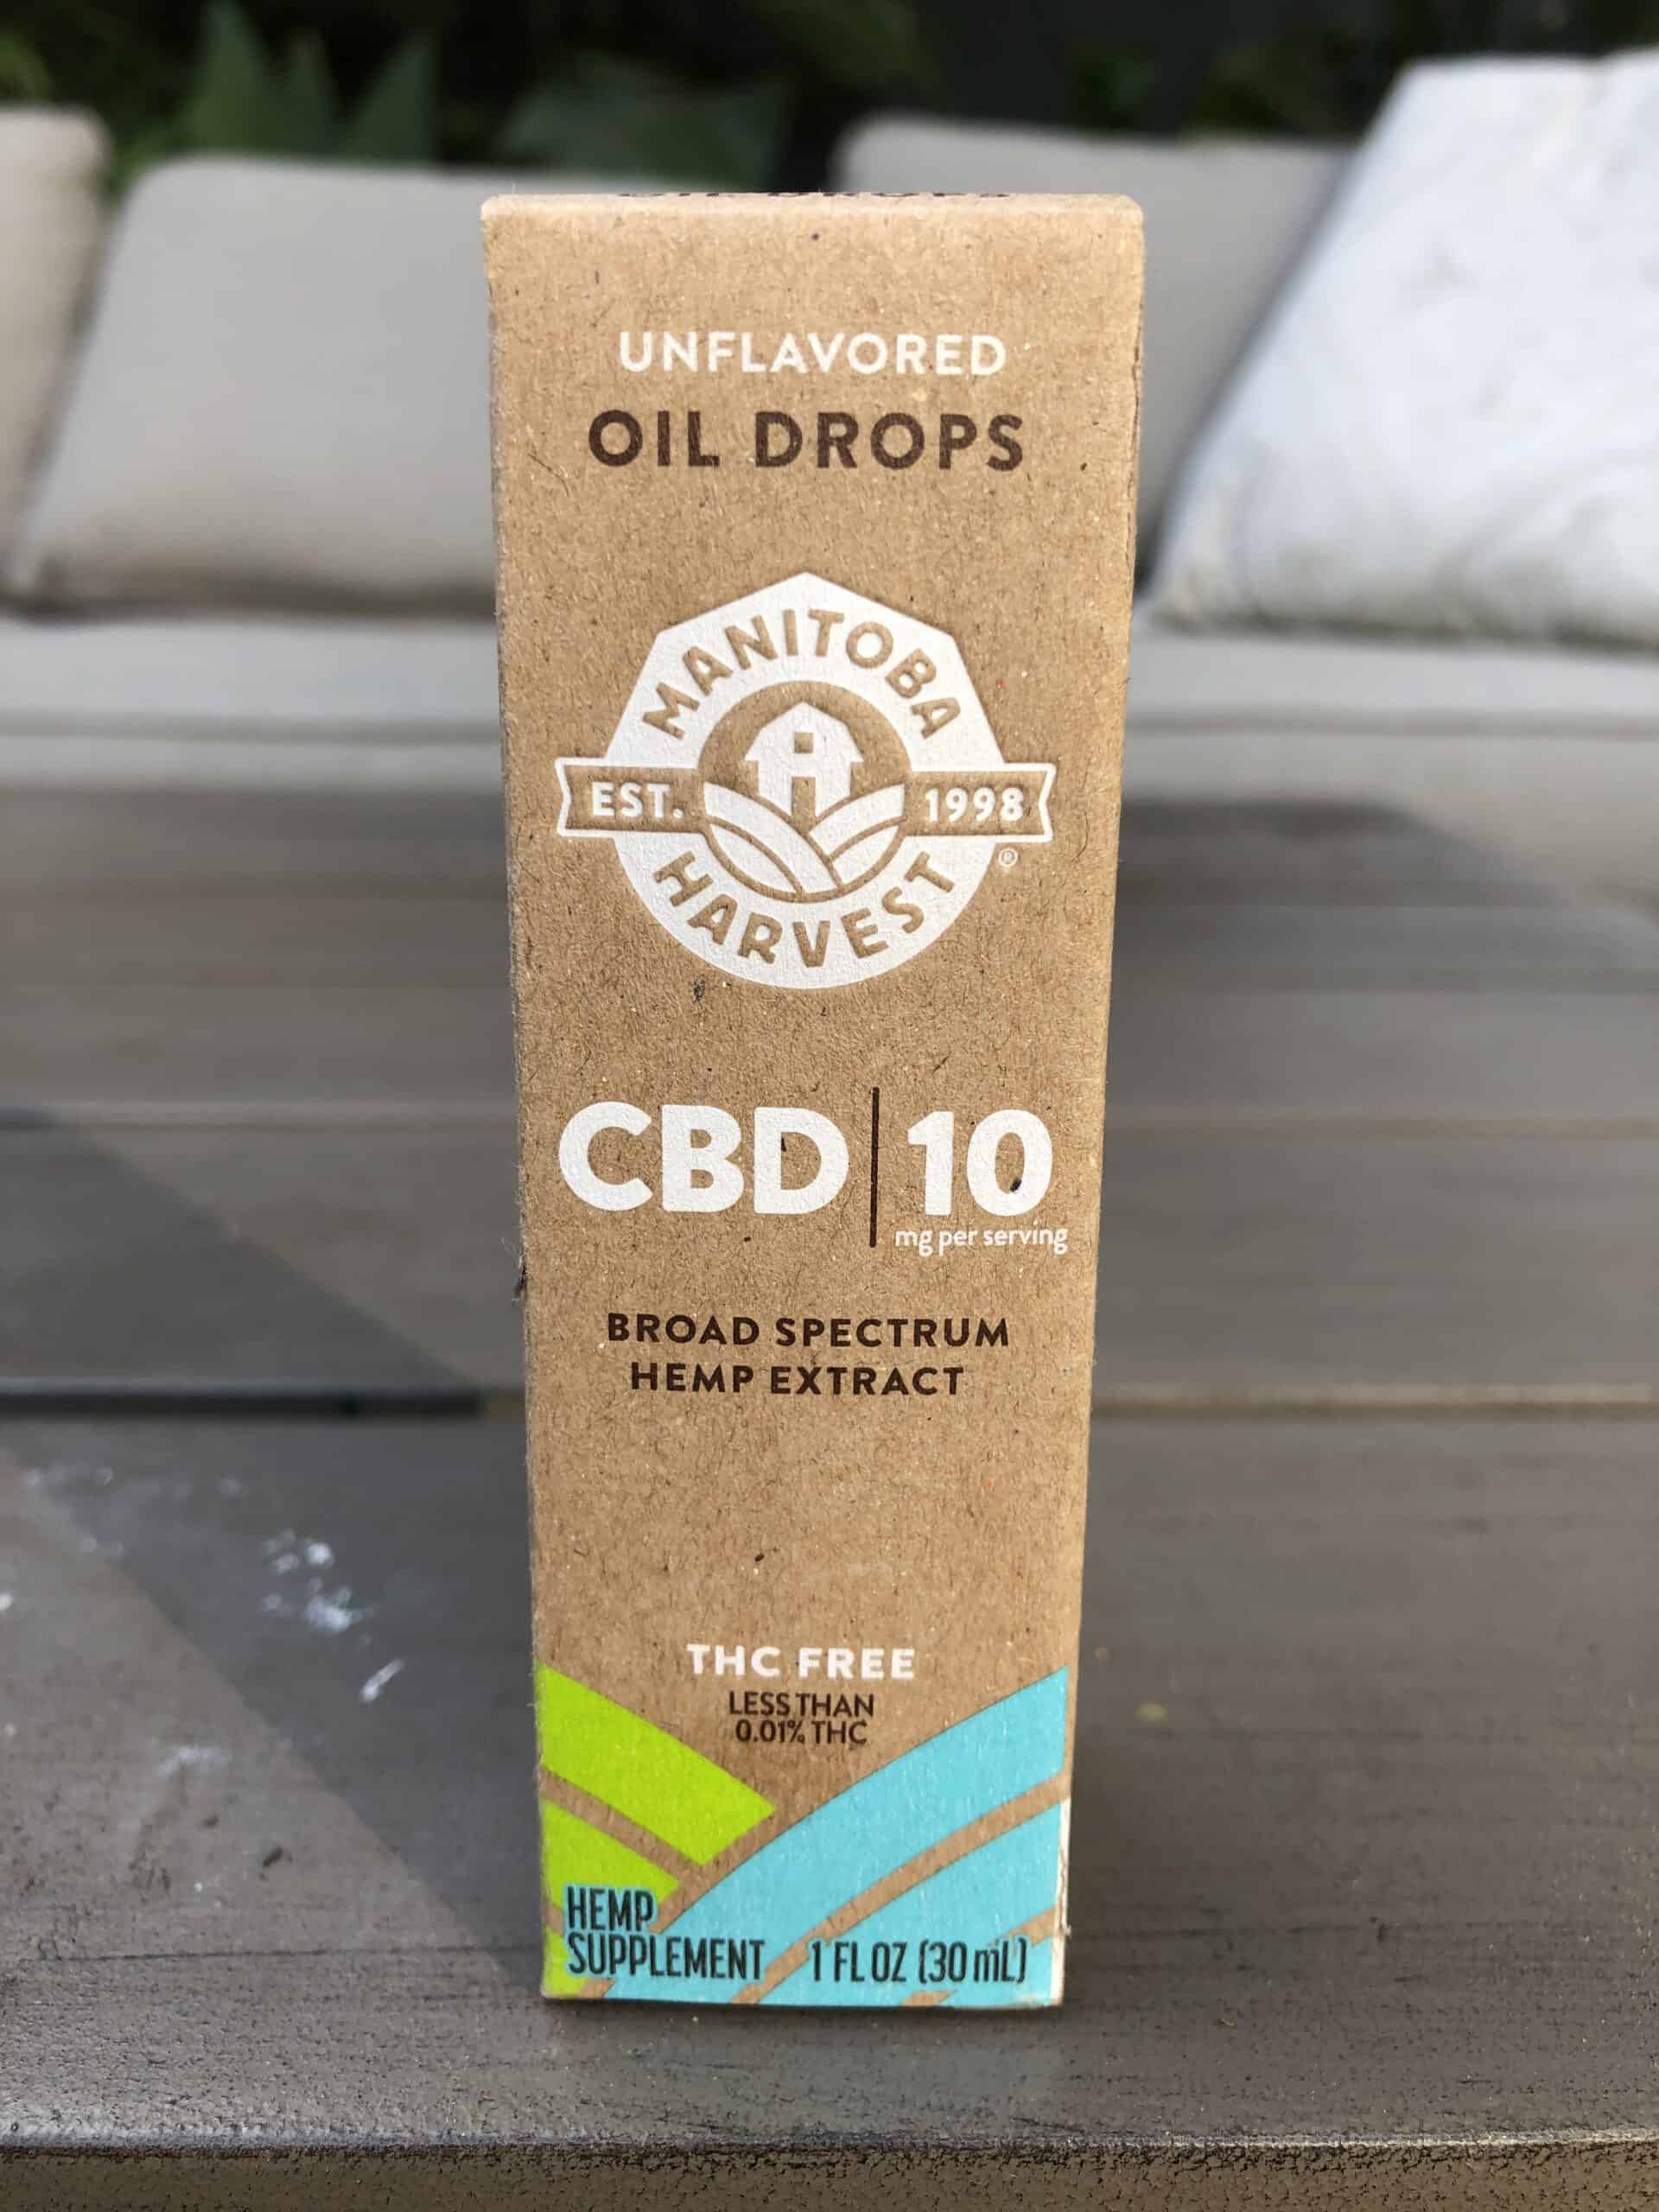 manitoba harvest unflavored cbd oil drops 300 mg save on cannabis review